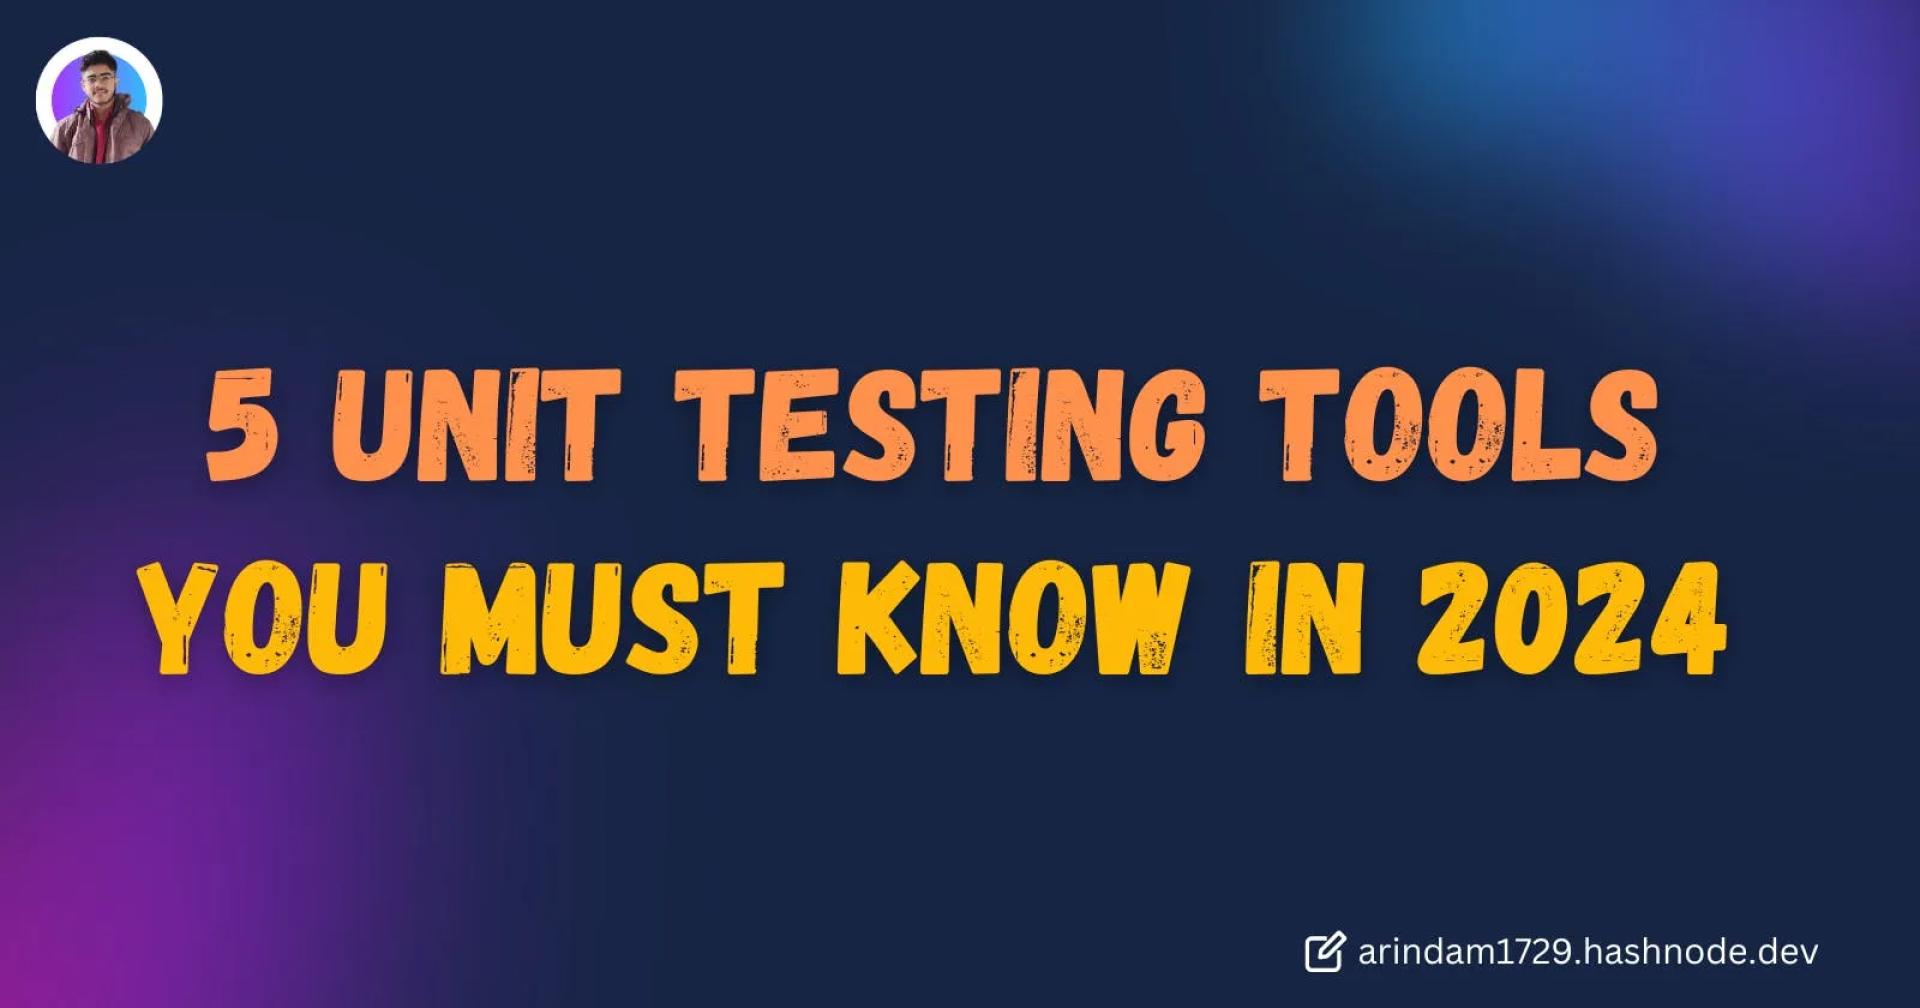 5 Unit Testing Tools You Must Know in 2024